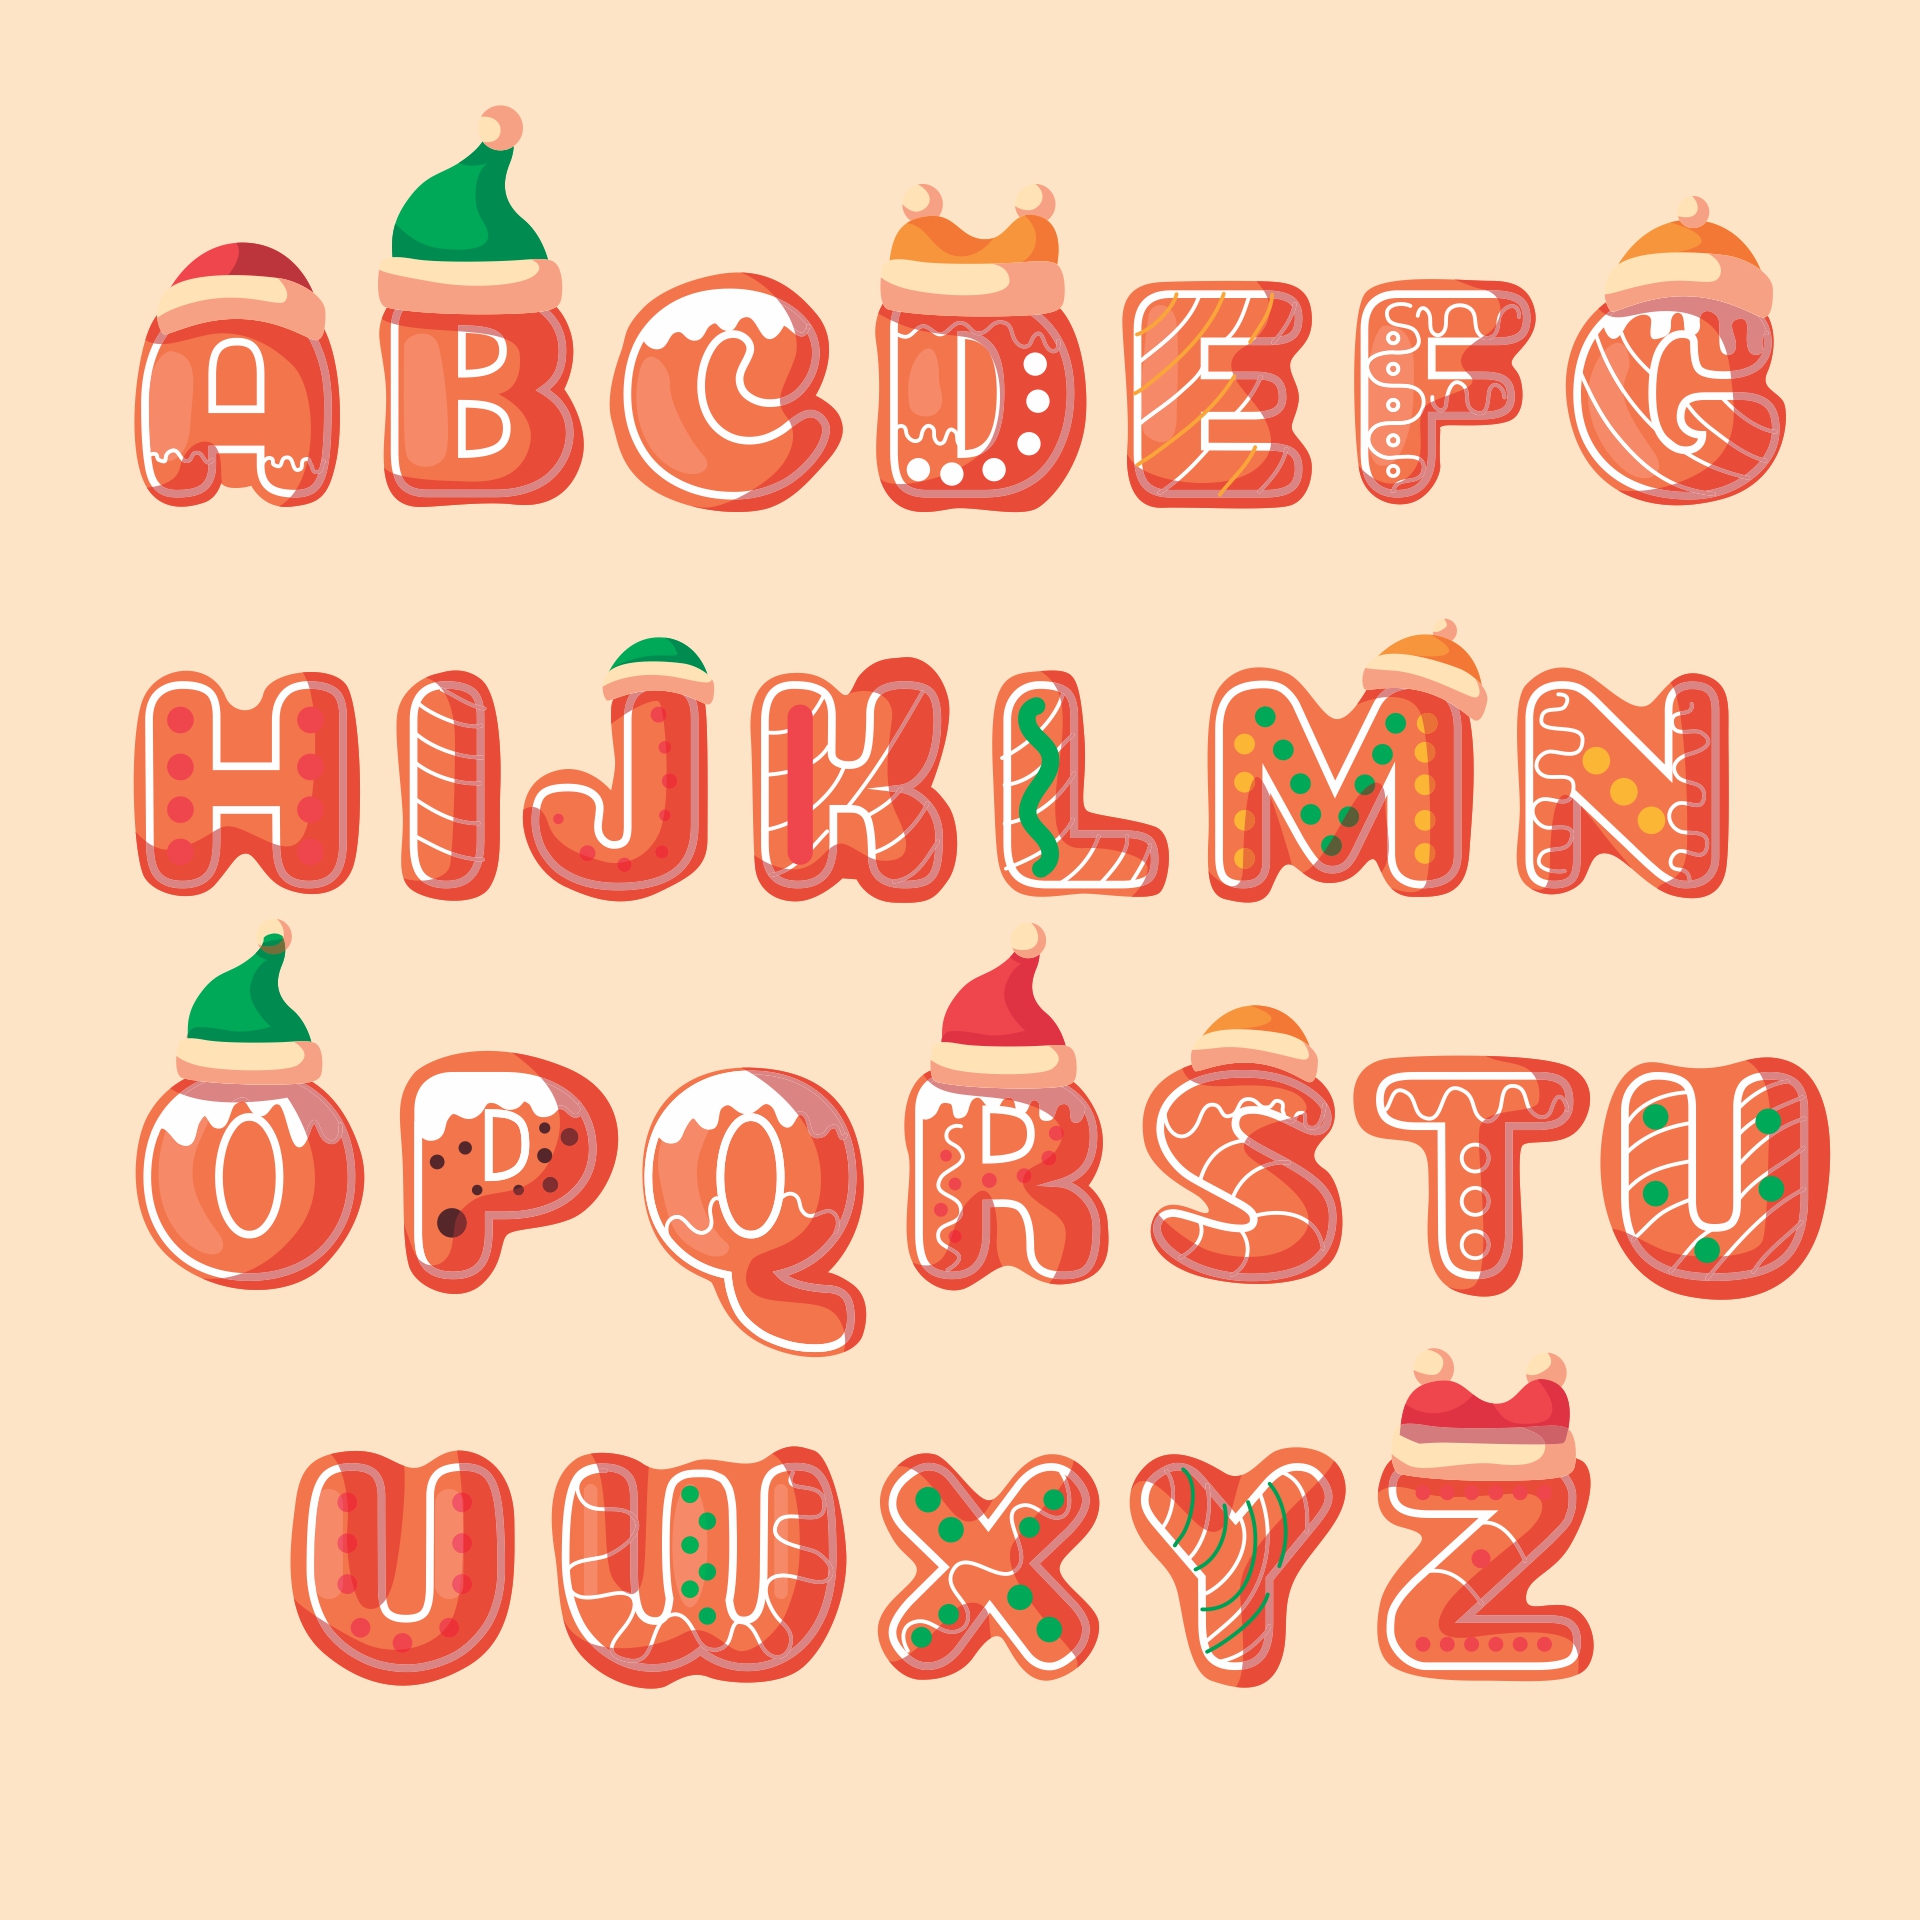 15 Best Merry Christmas Printable For Letters